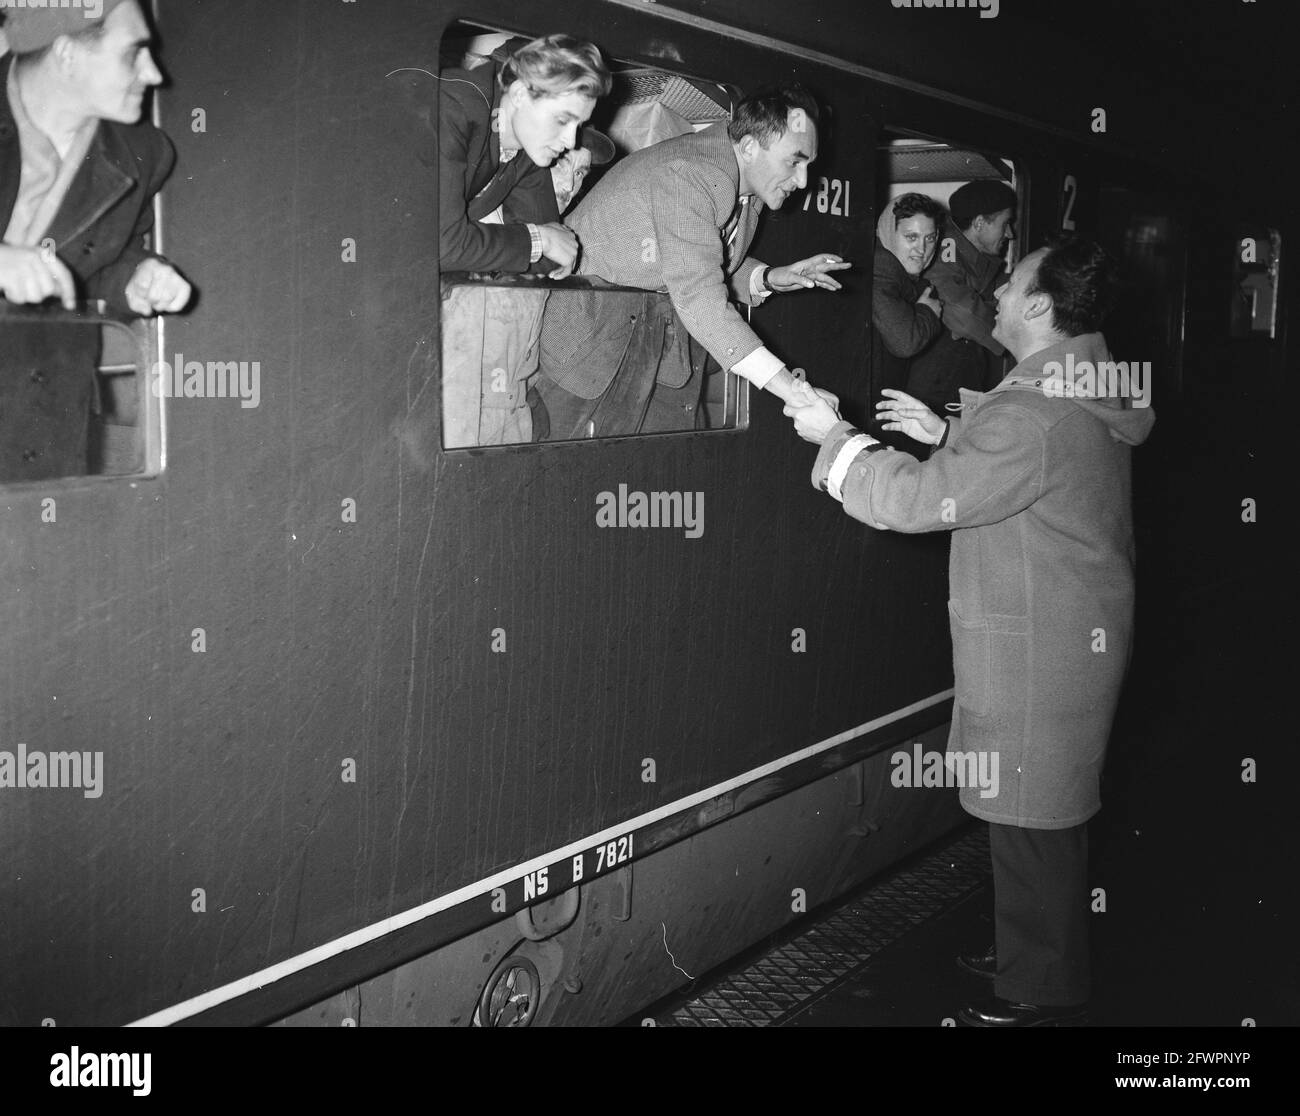 Arrival third group of Hungarian refugees, November 25, 1956, ARRIVAL, FLIGHTS, The Netherlands, 20th century press agency photo, news to remember, documentary, historic photography 1945-1990, visual stories, human history of the Twentieth Century, capturing moments in time Stock Photo